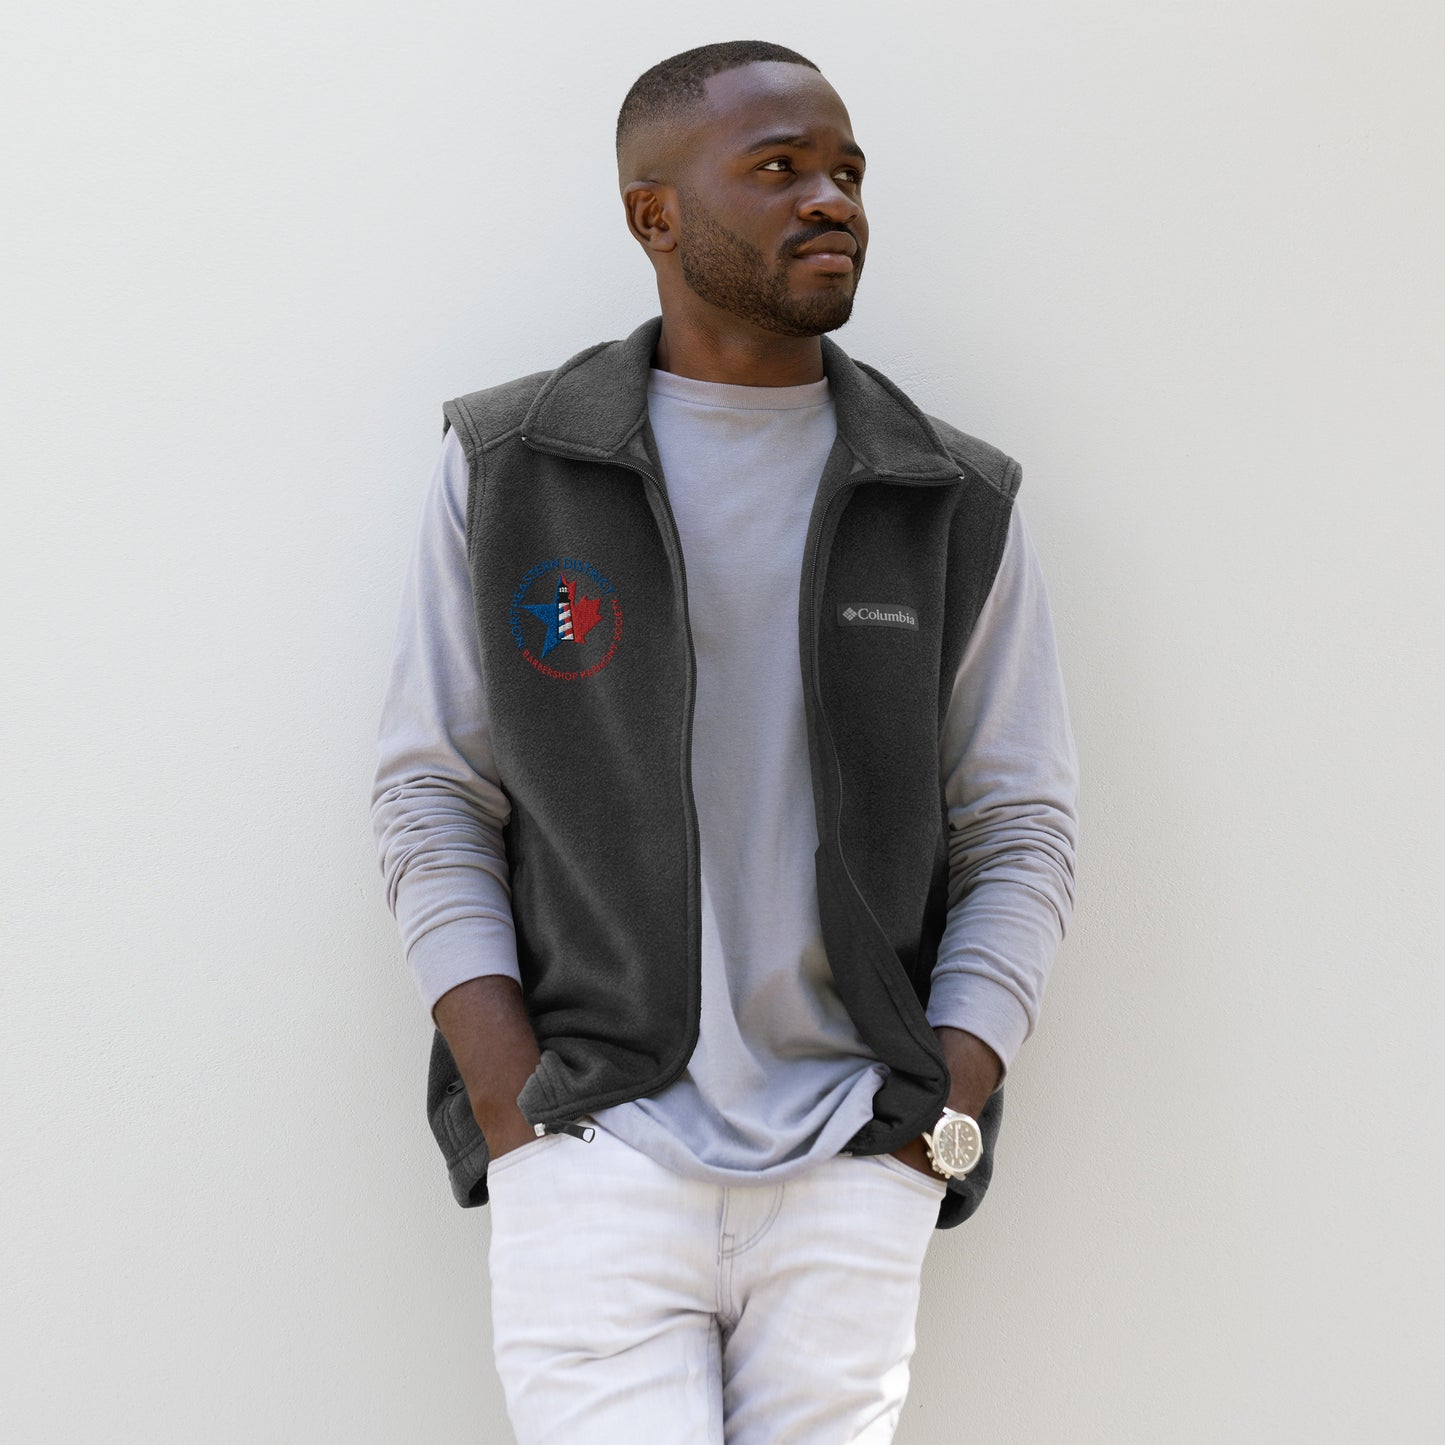 NED - Embroidered Relaxed fit Columbia fleece vest